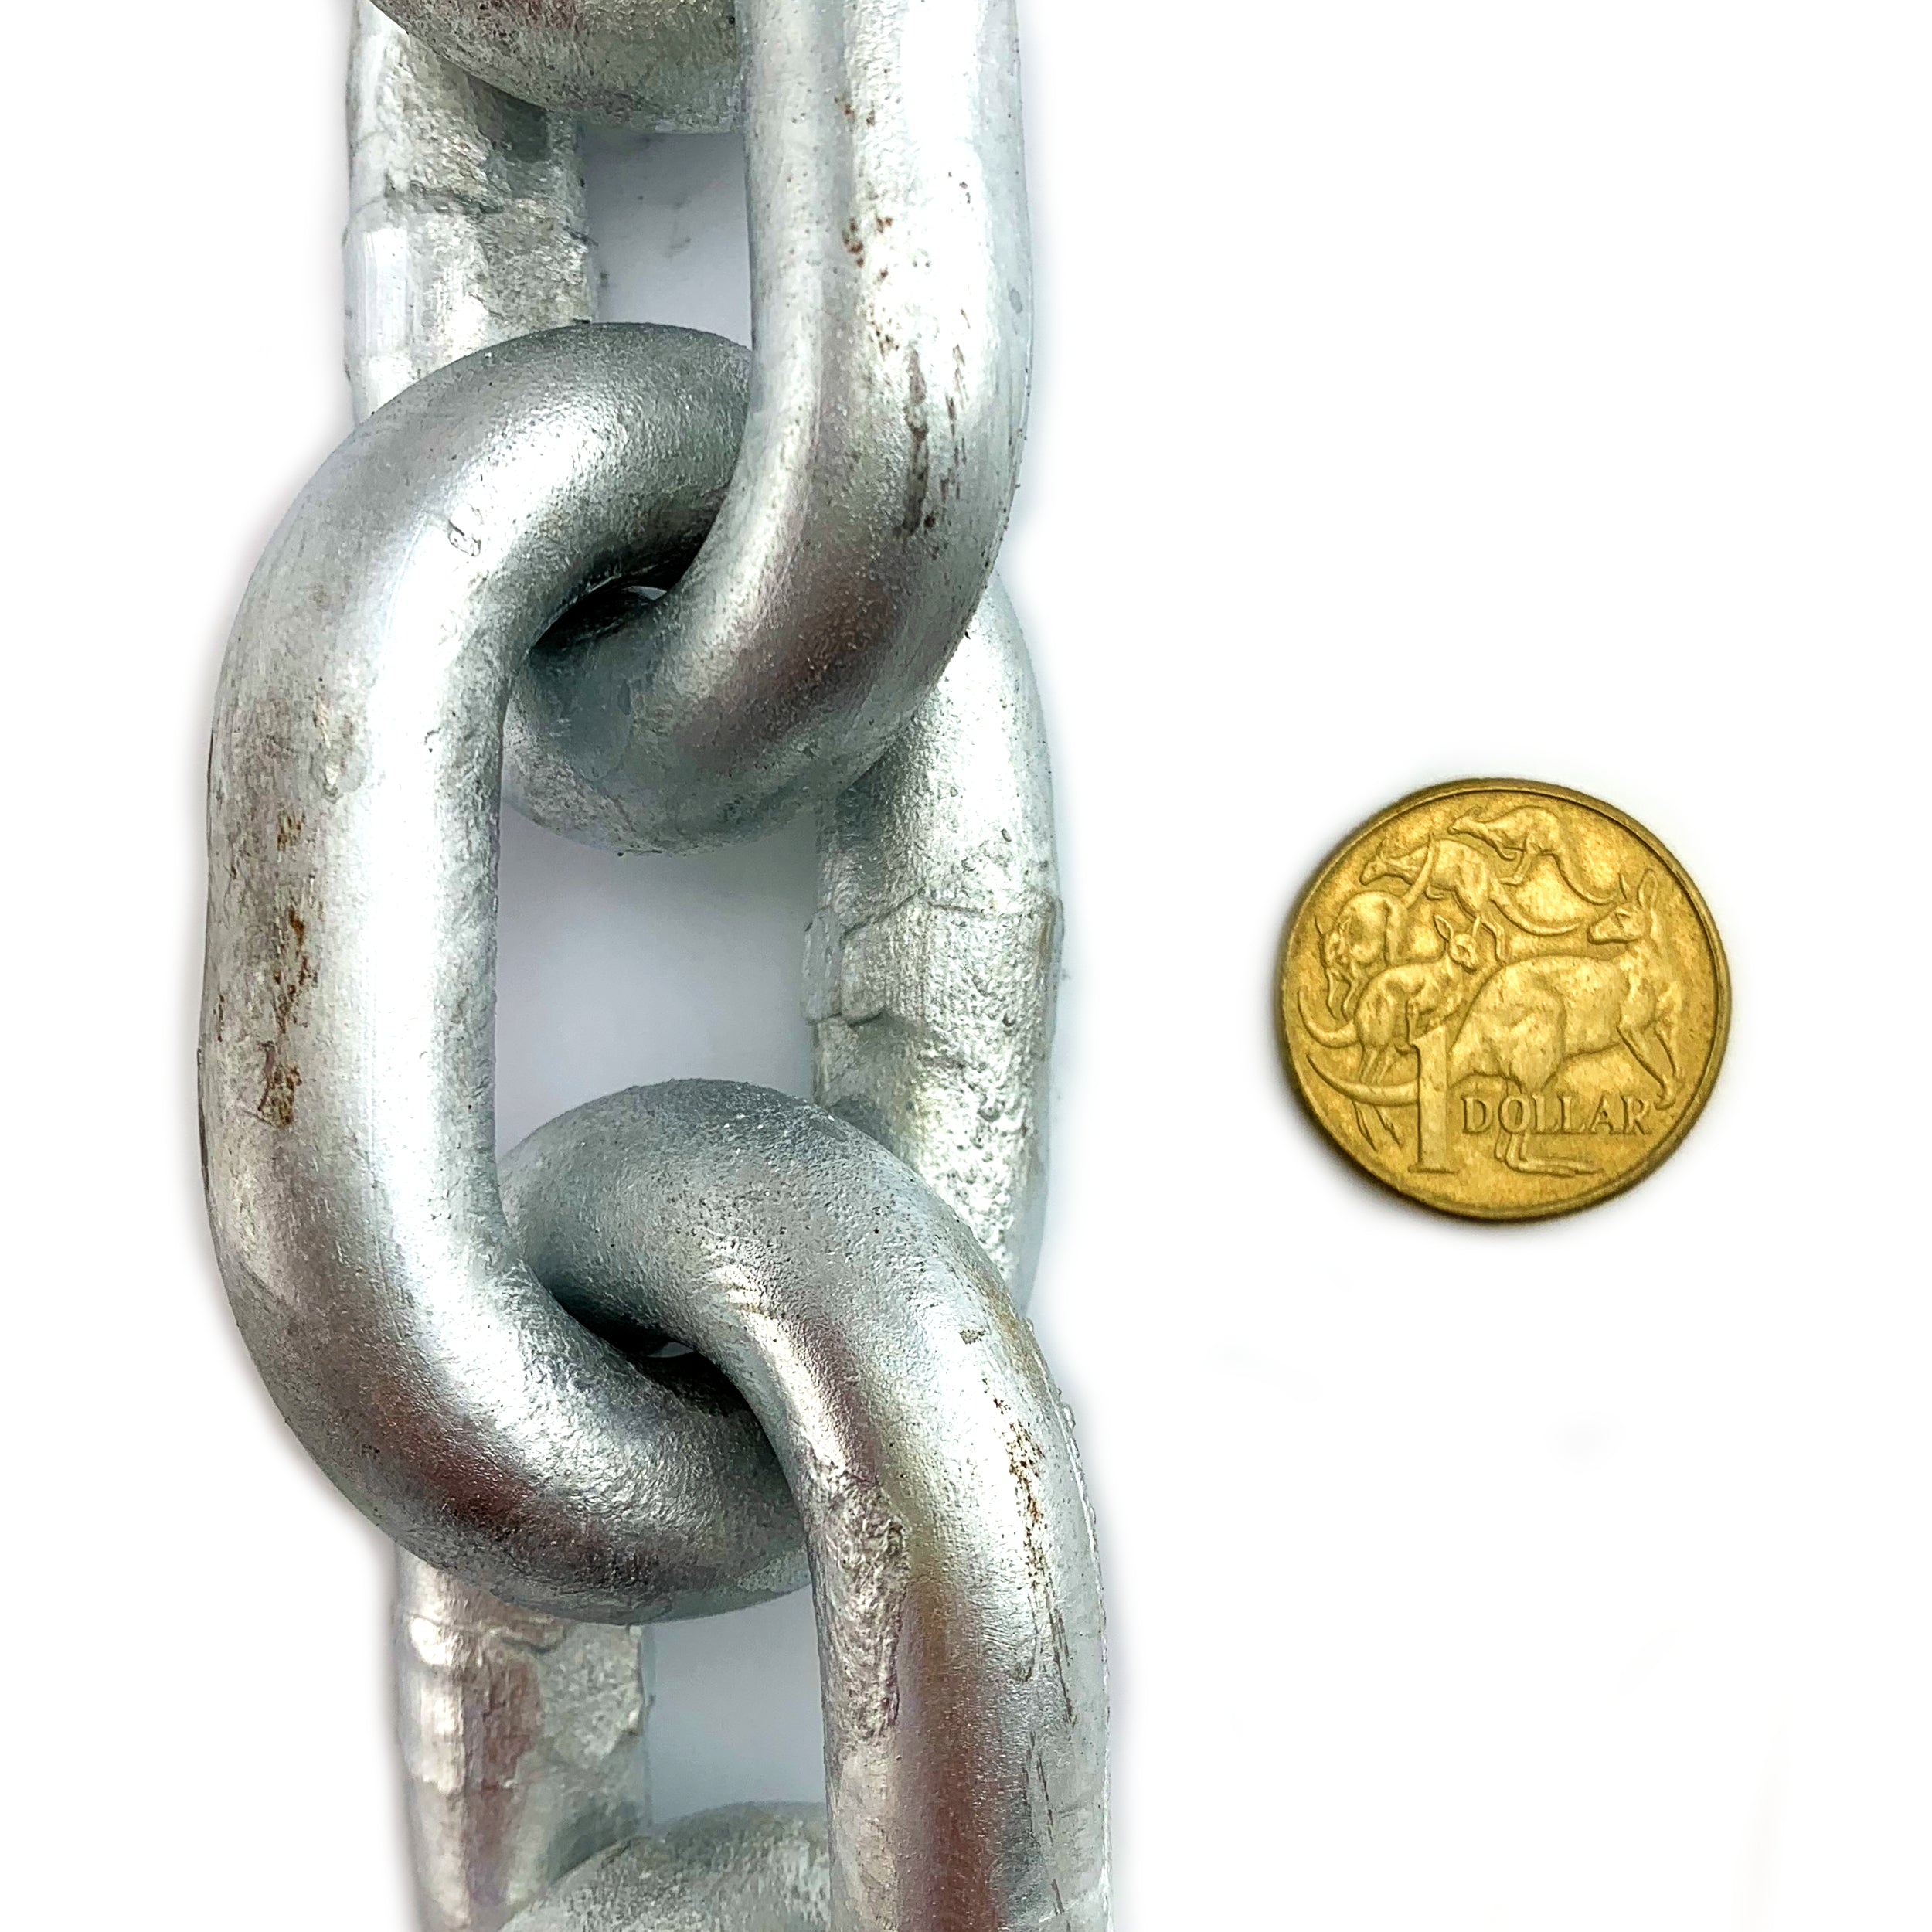 13mm Short Link Boat Anchor Chain Galvanised. Shop online at chain.com.au